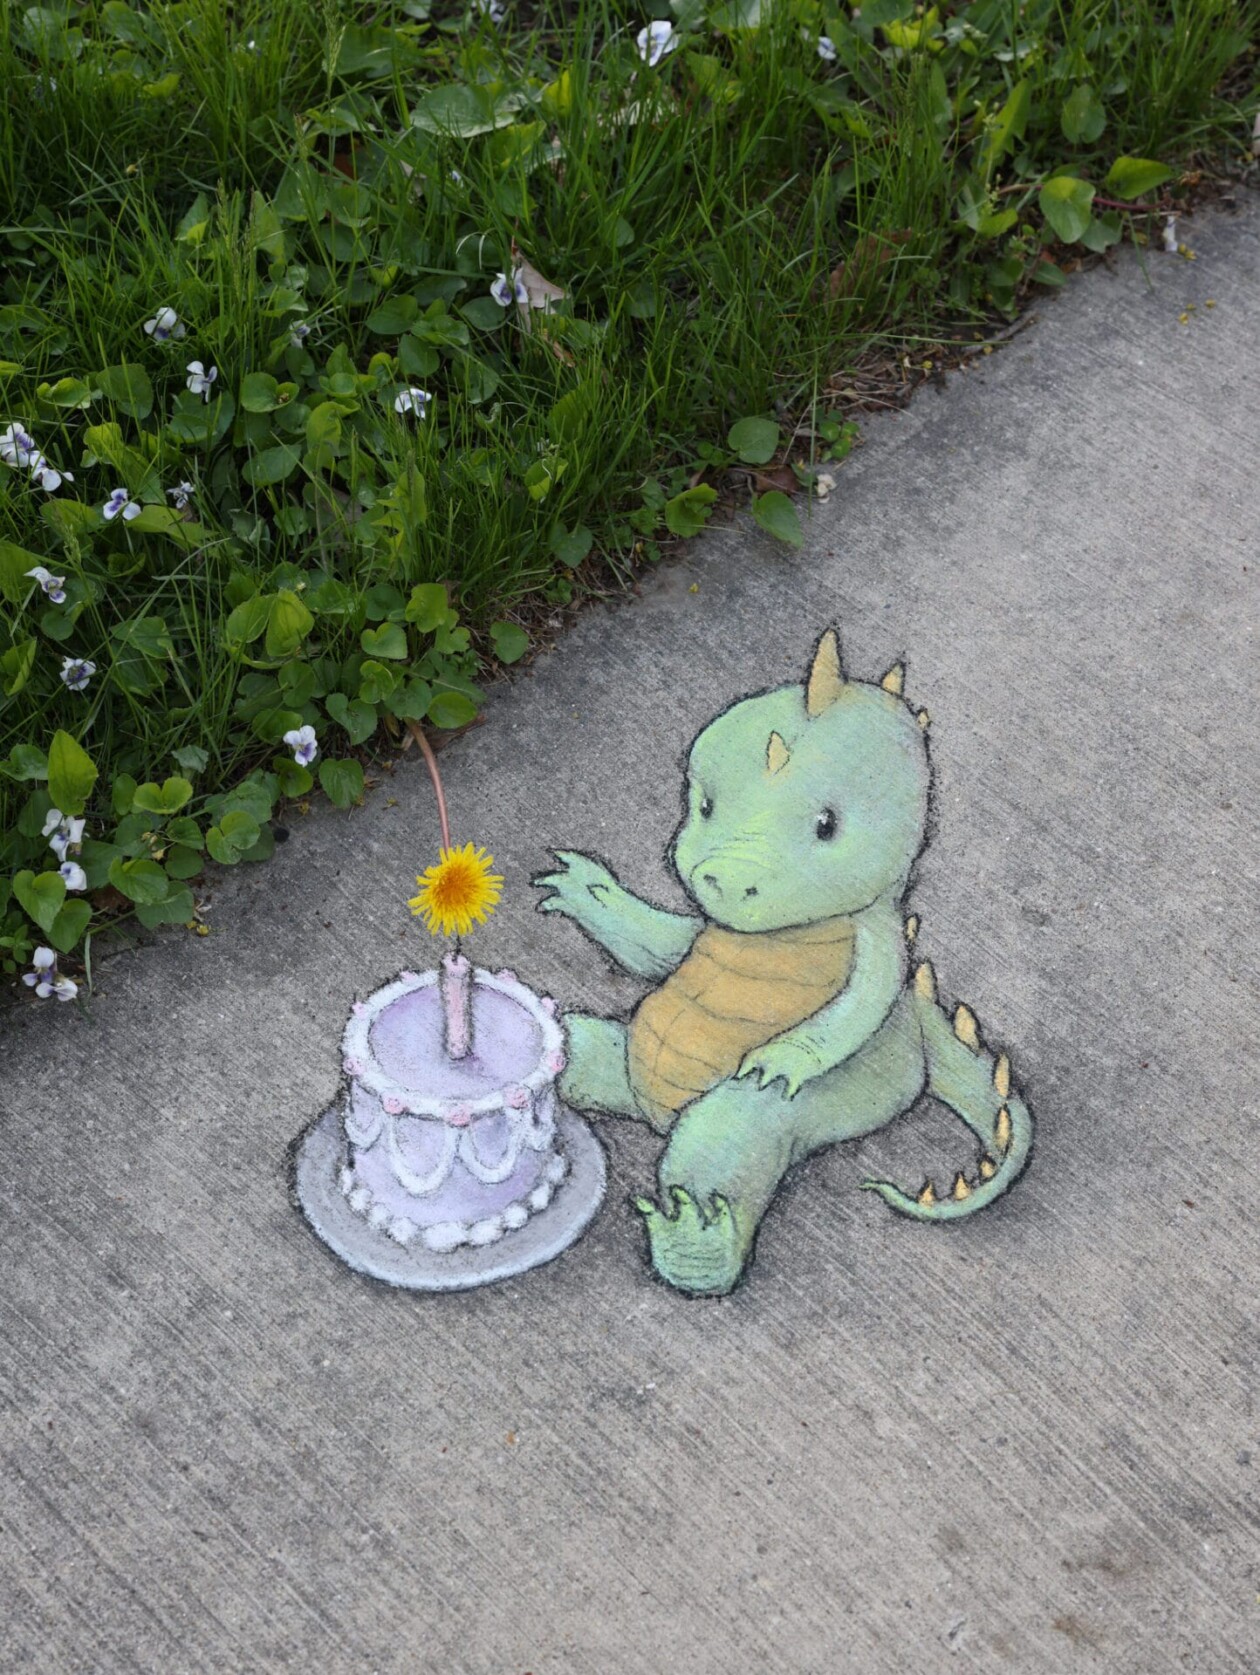 Playful Characters Drawn On Everyday Streets By David Zinn (3)